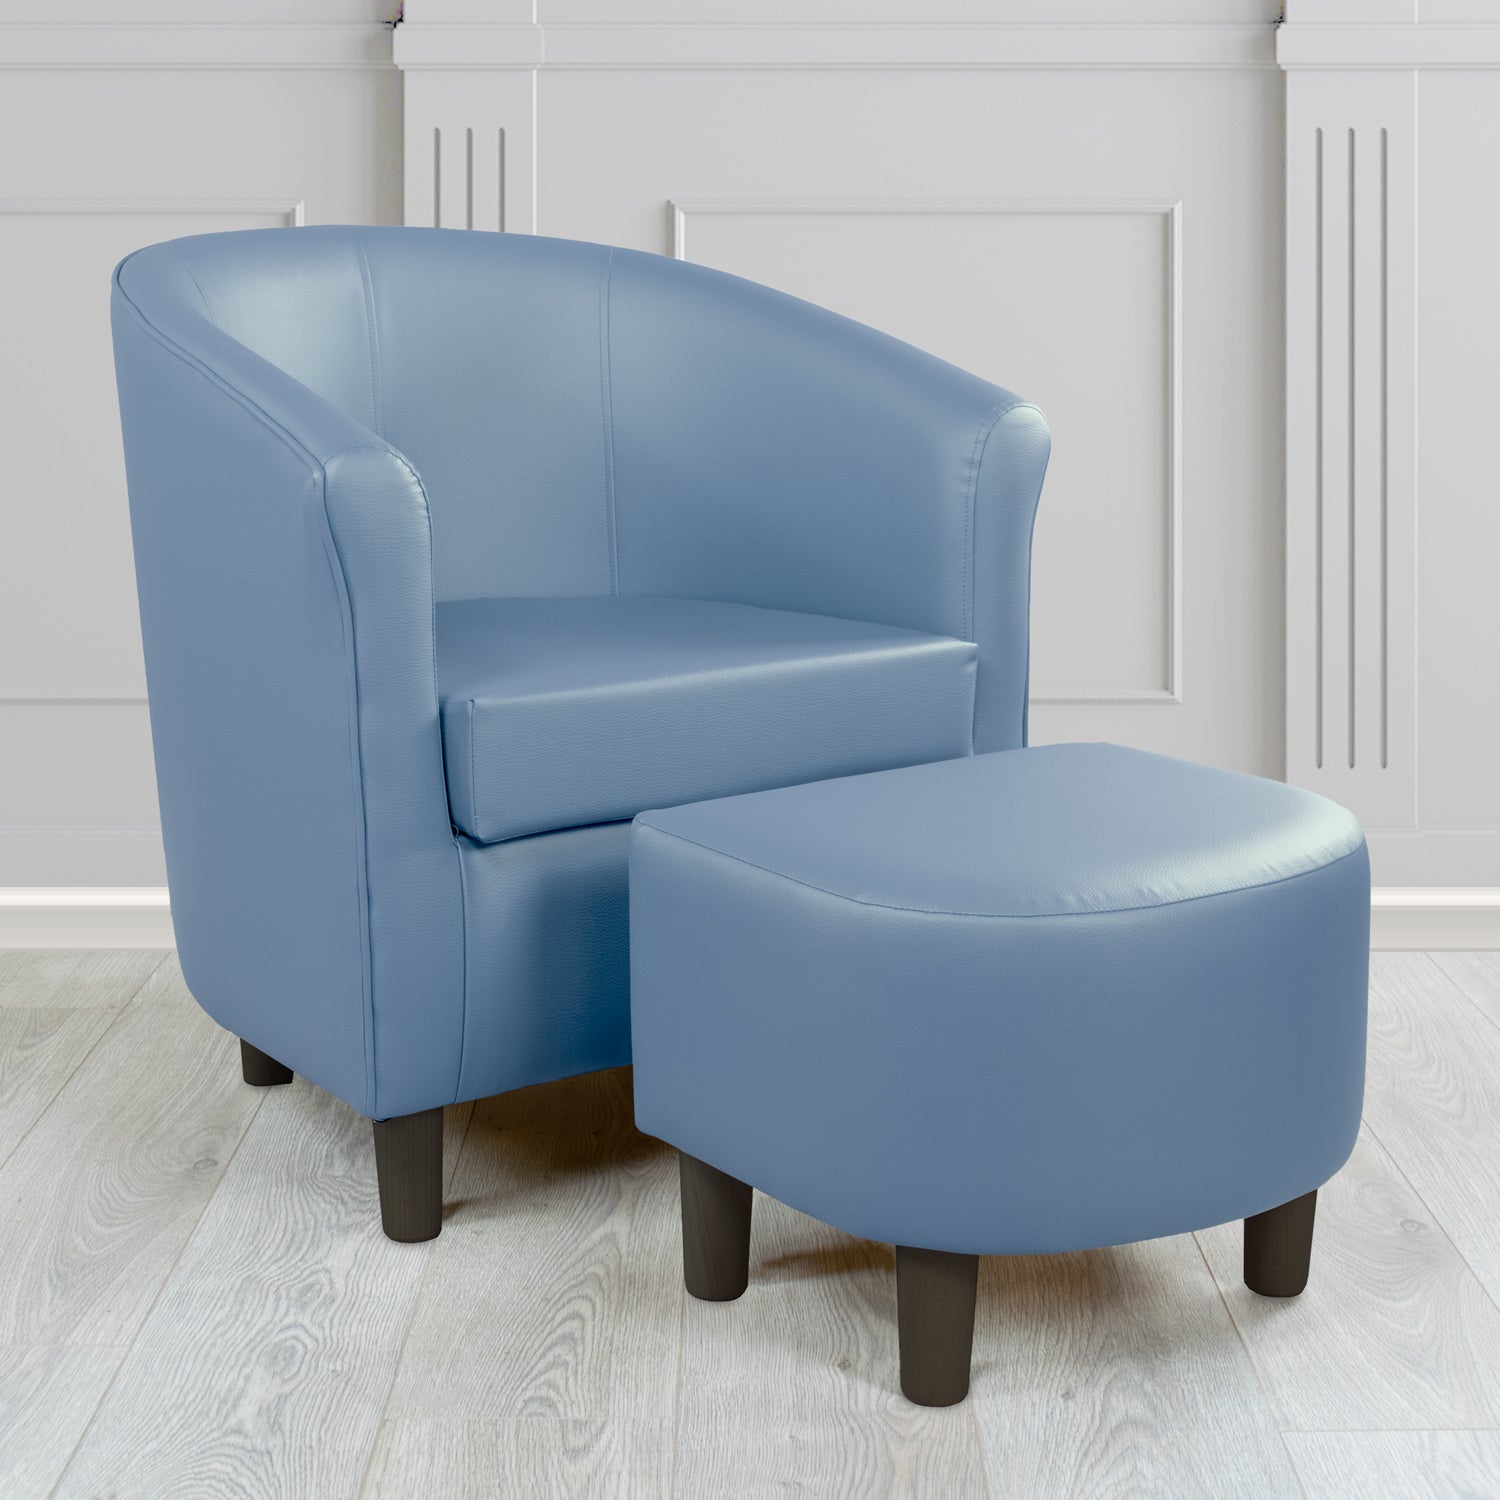 Tuscany Just Colour Dolphin Faux Leather Tub Chair with Dee Footstool Set - The Tub Chair Shop